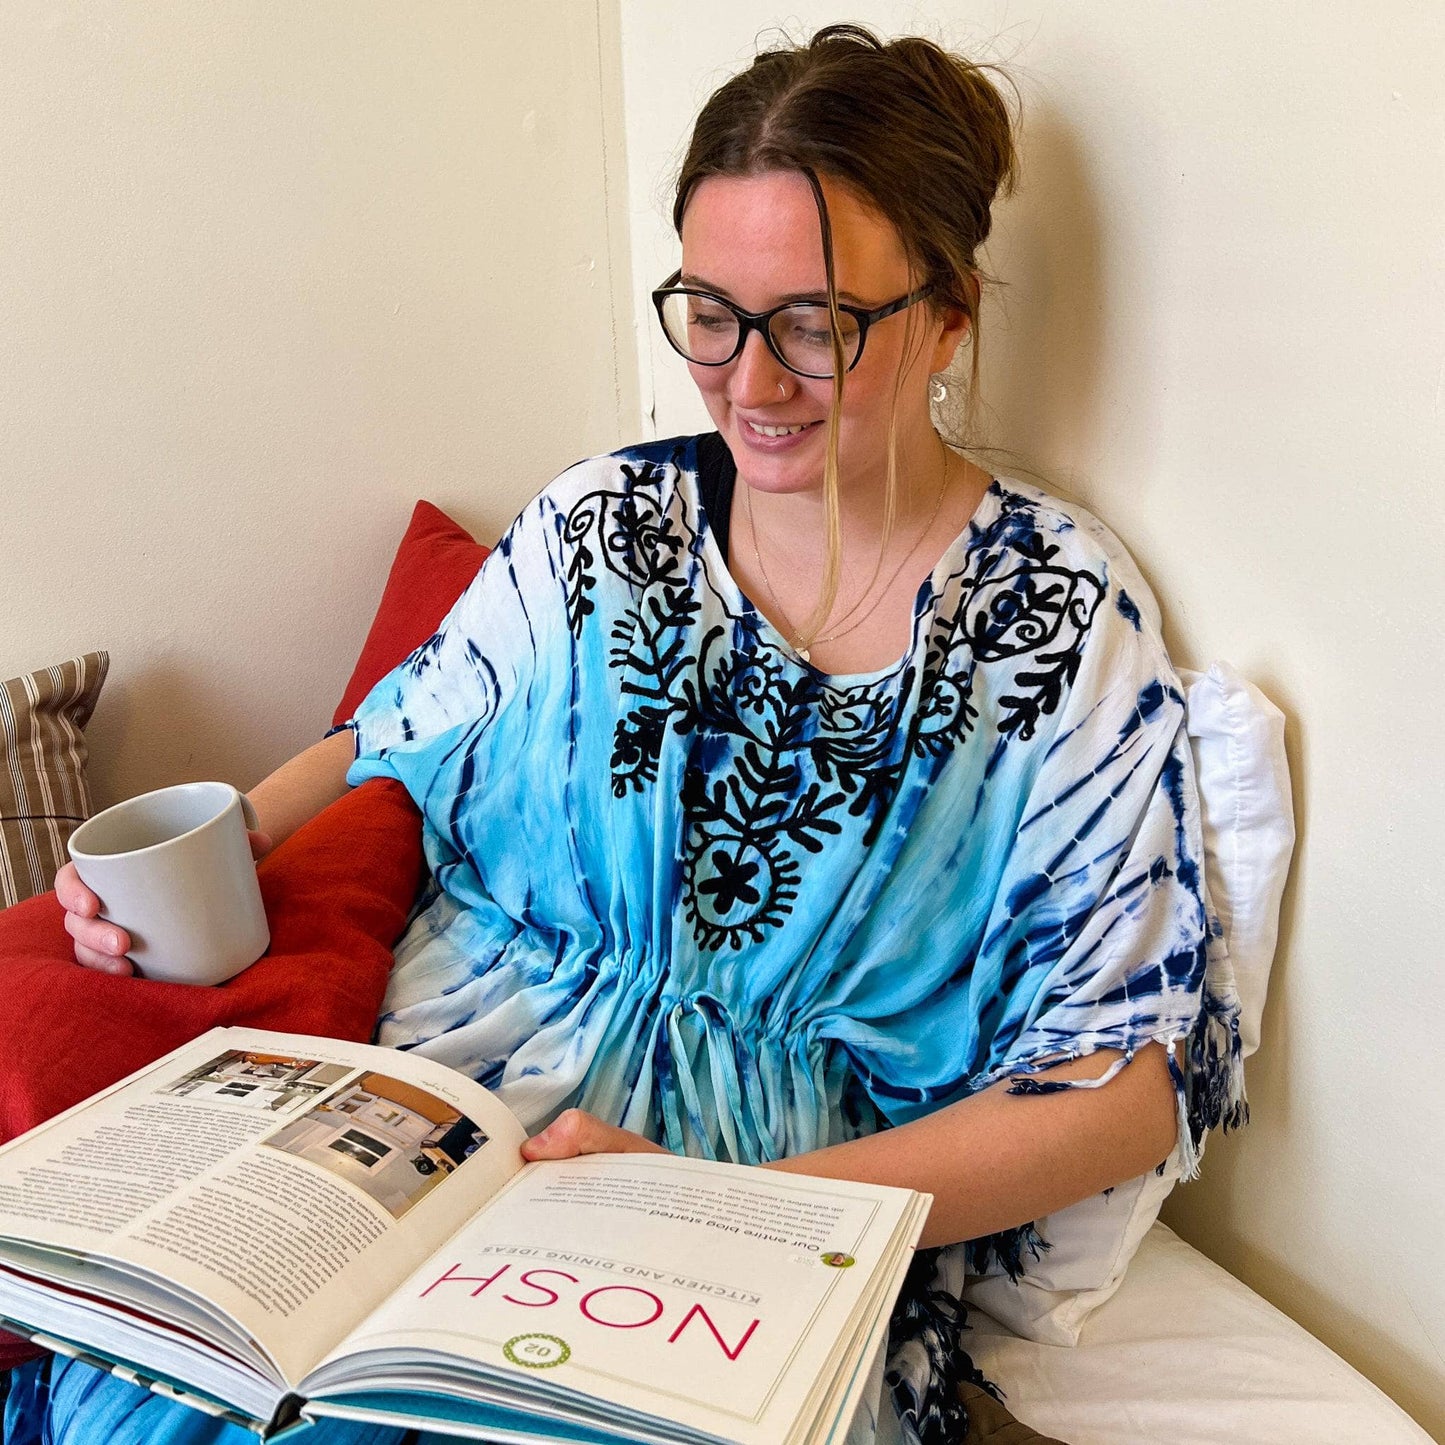 Woman wearing a blue tie dye tunic sitting in bed, reading a book.